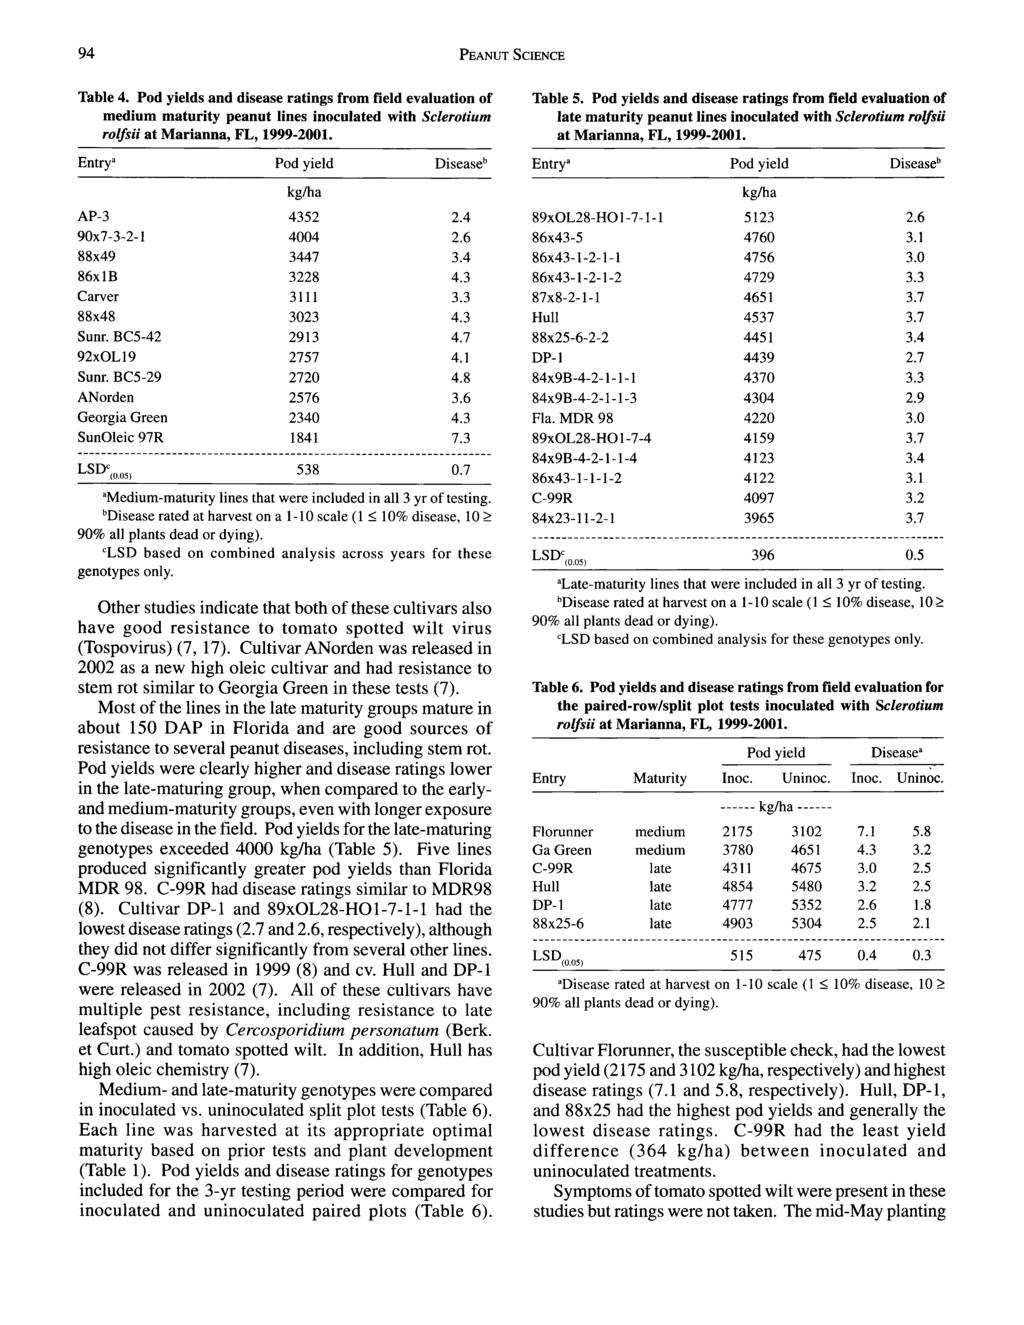 94 PEANUT SCIENCE Table 4. Pod yields and disease ratings from field evaluation of medium maturity peanut lines inocud with Sclerotium rolfsii at Marianna, FL, 1999-2001.